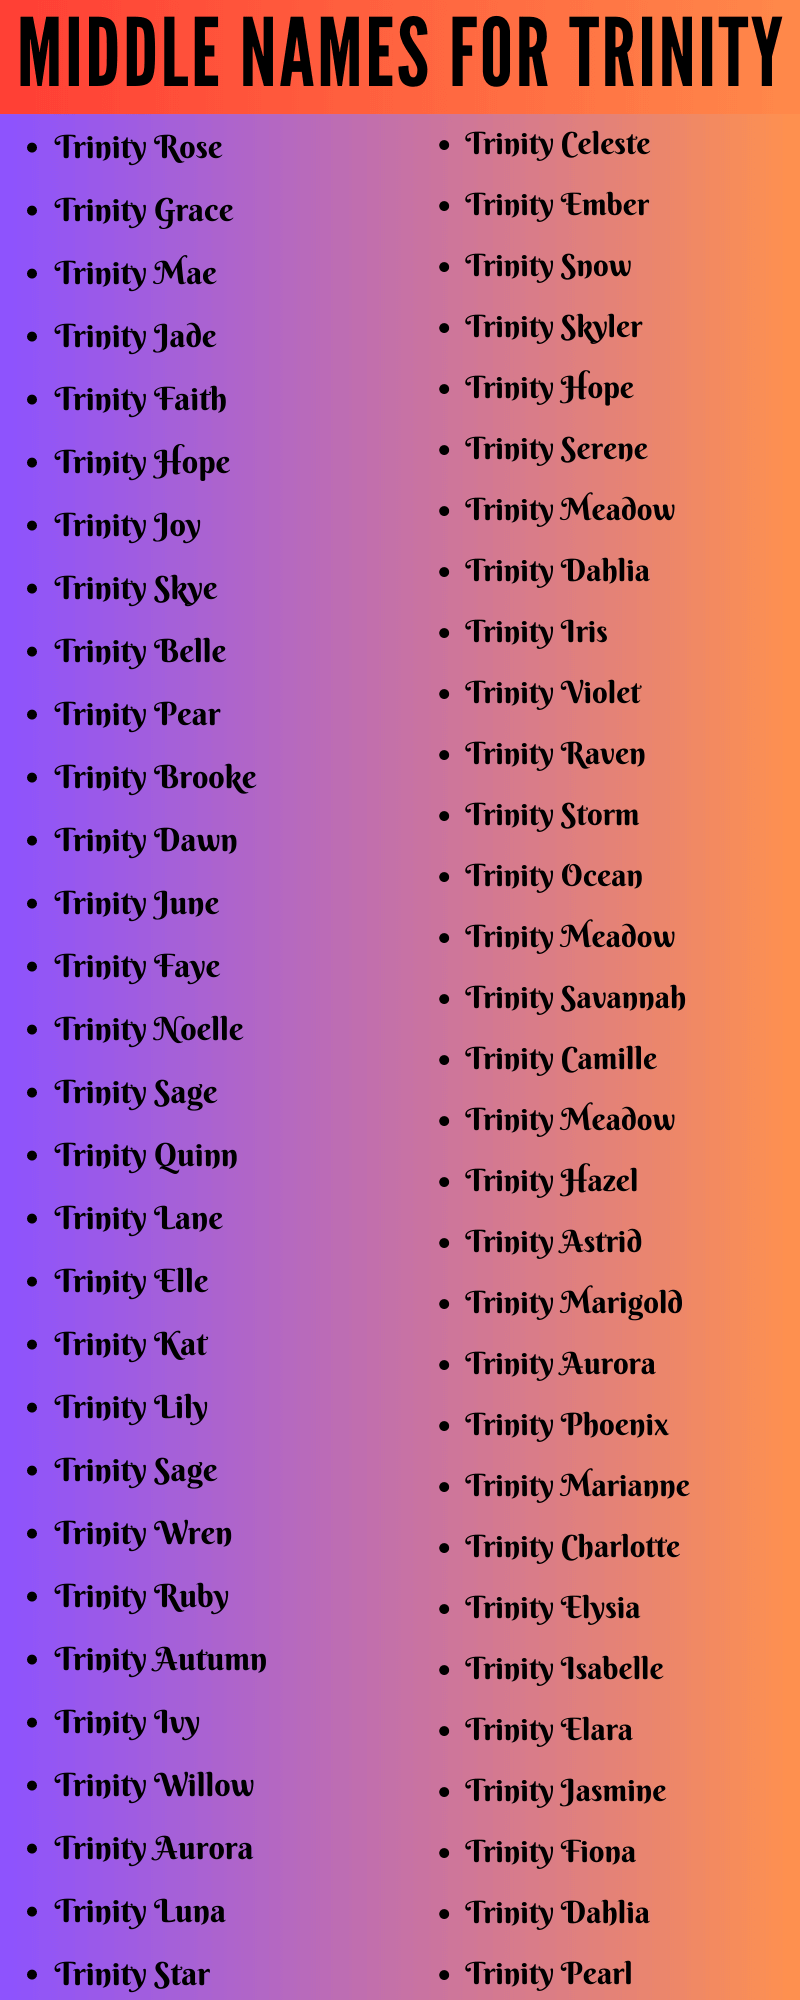 400 Cute Middle Names For Trinity